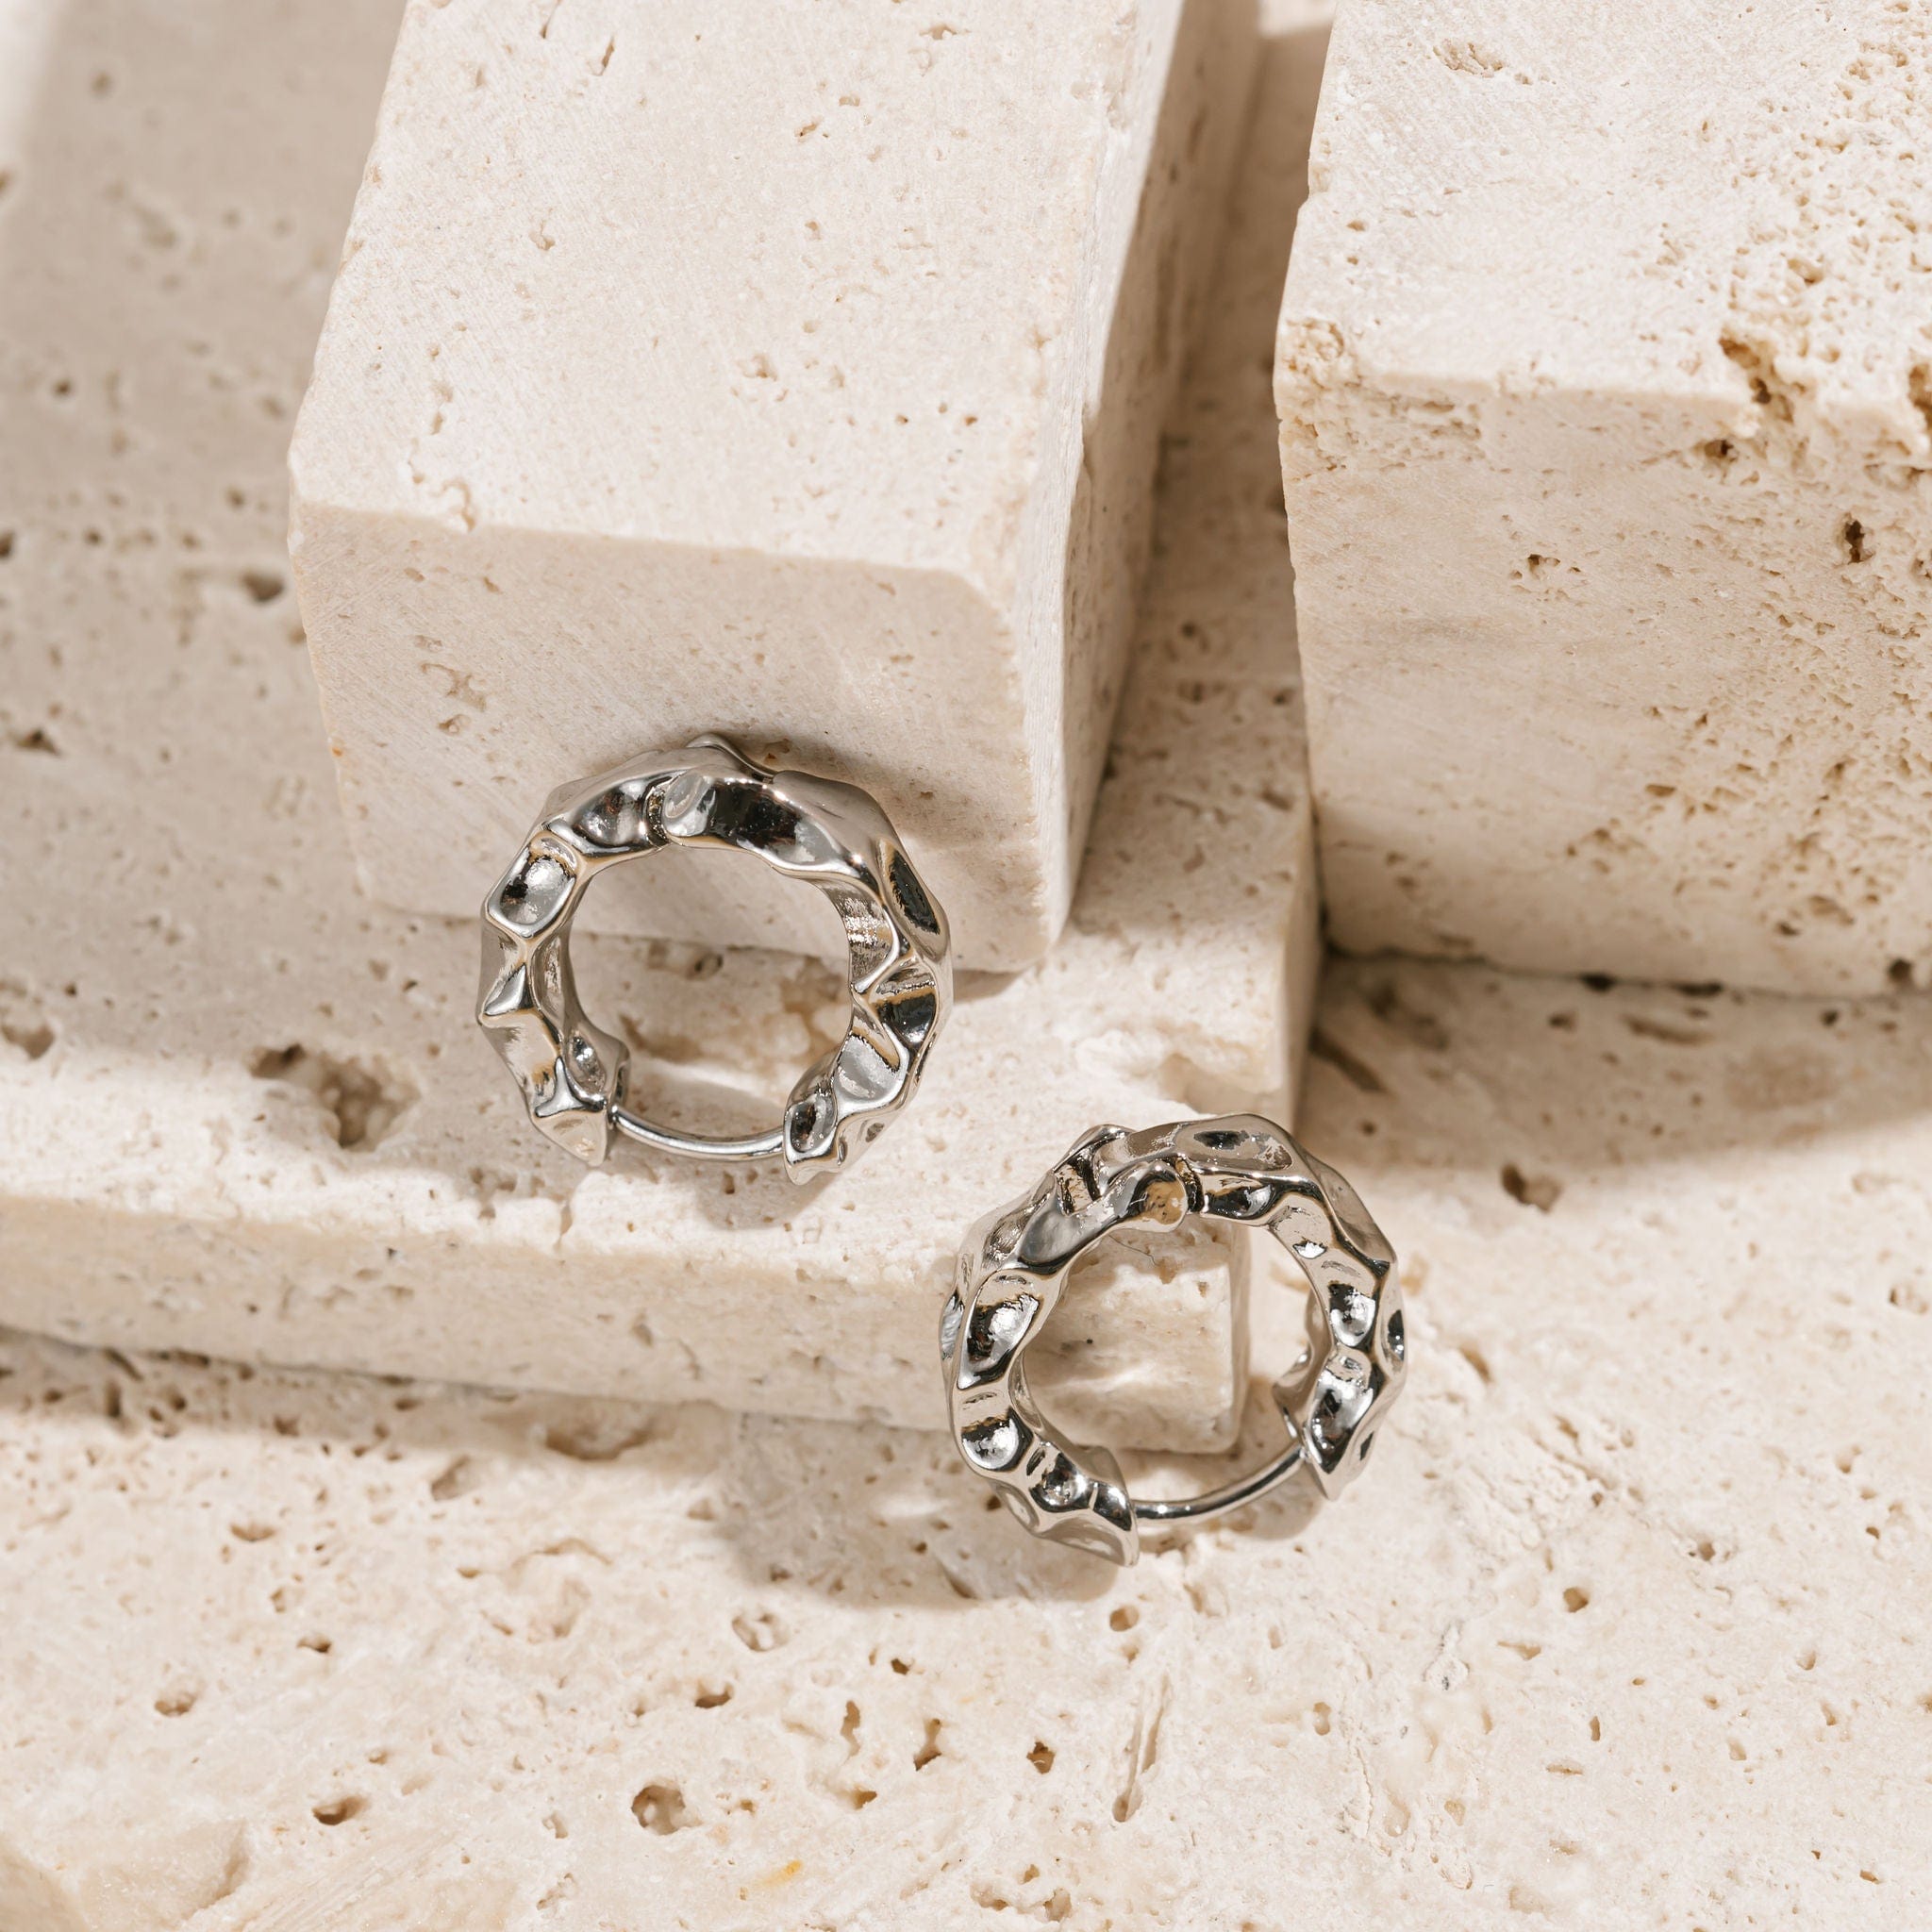  A pair of Marquis Hoop Mini Platinum earrings are displayed on a stone counter, the light accentuating the hammered texture of the hoops. 